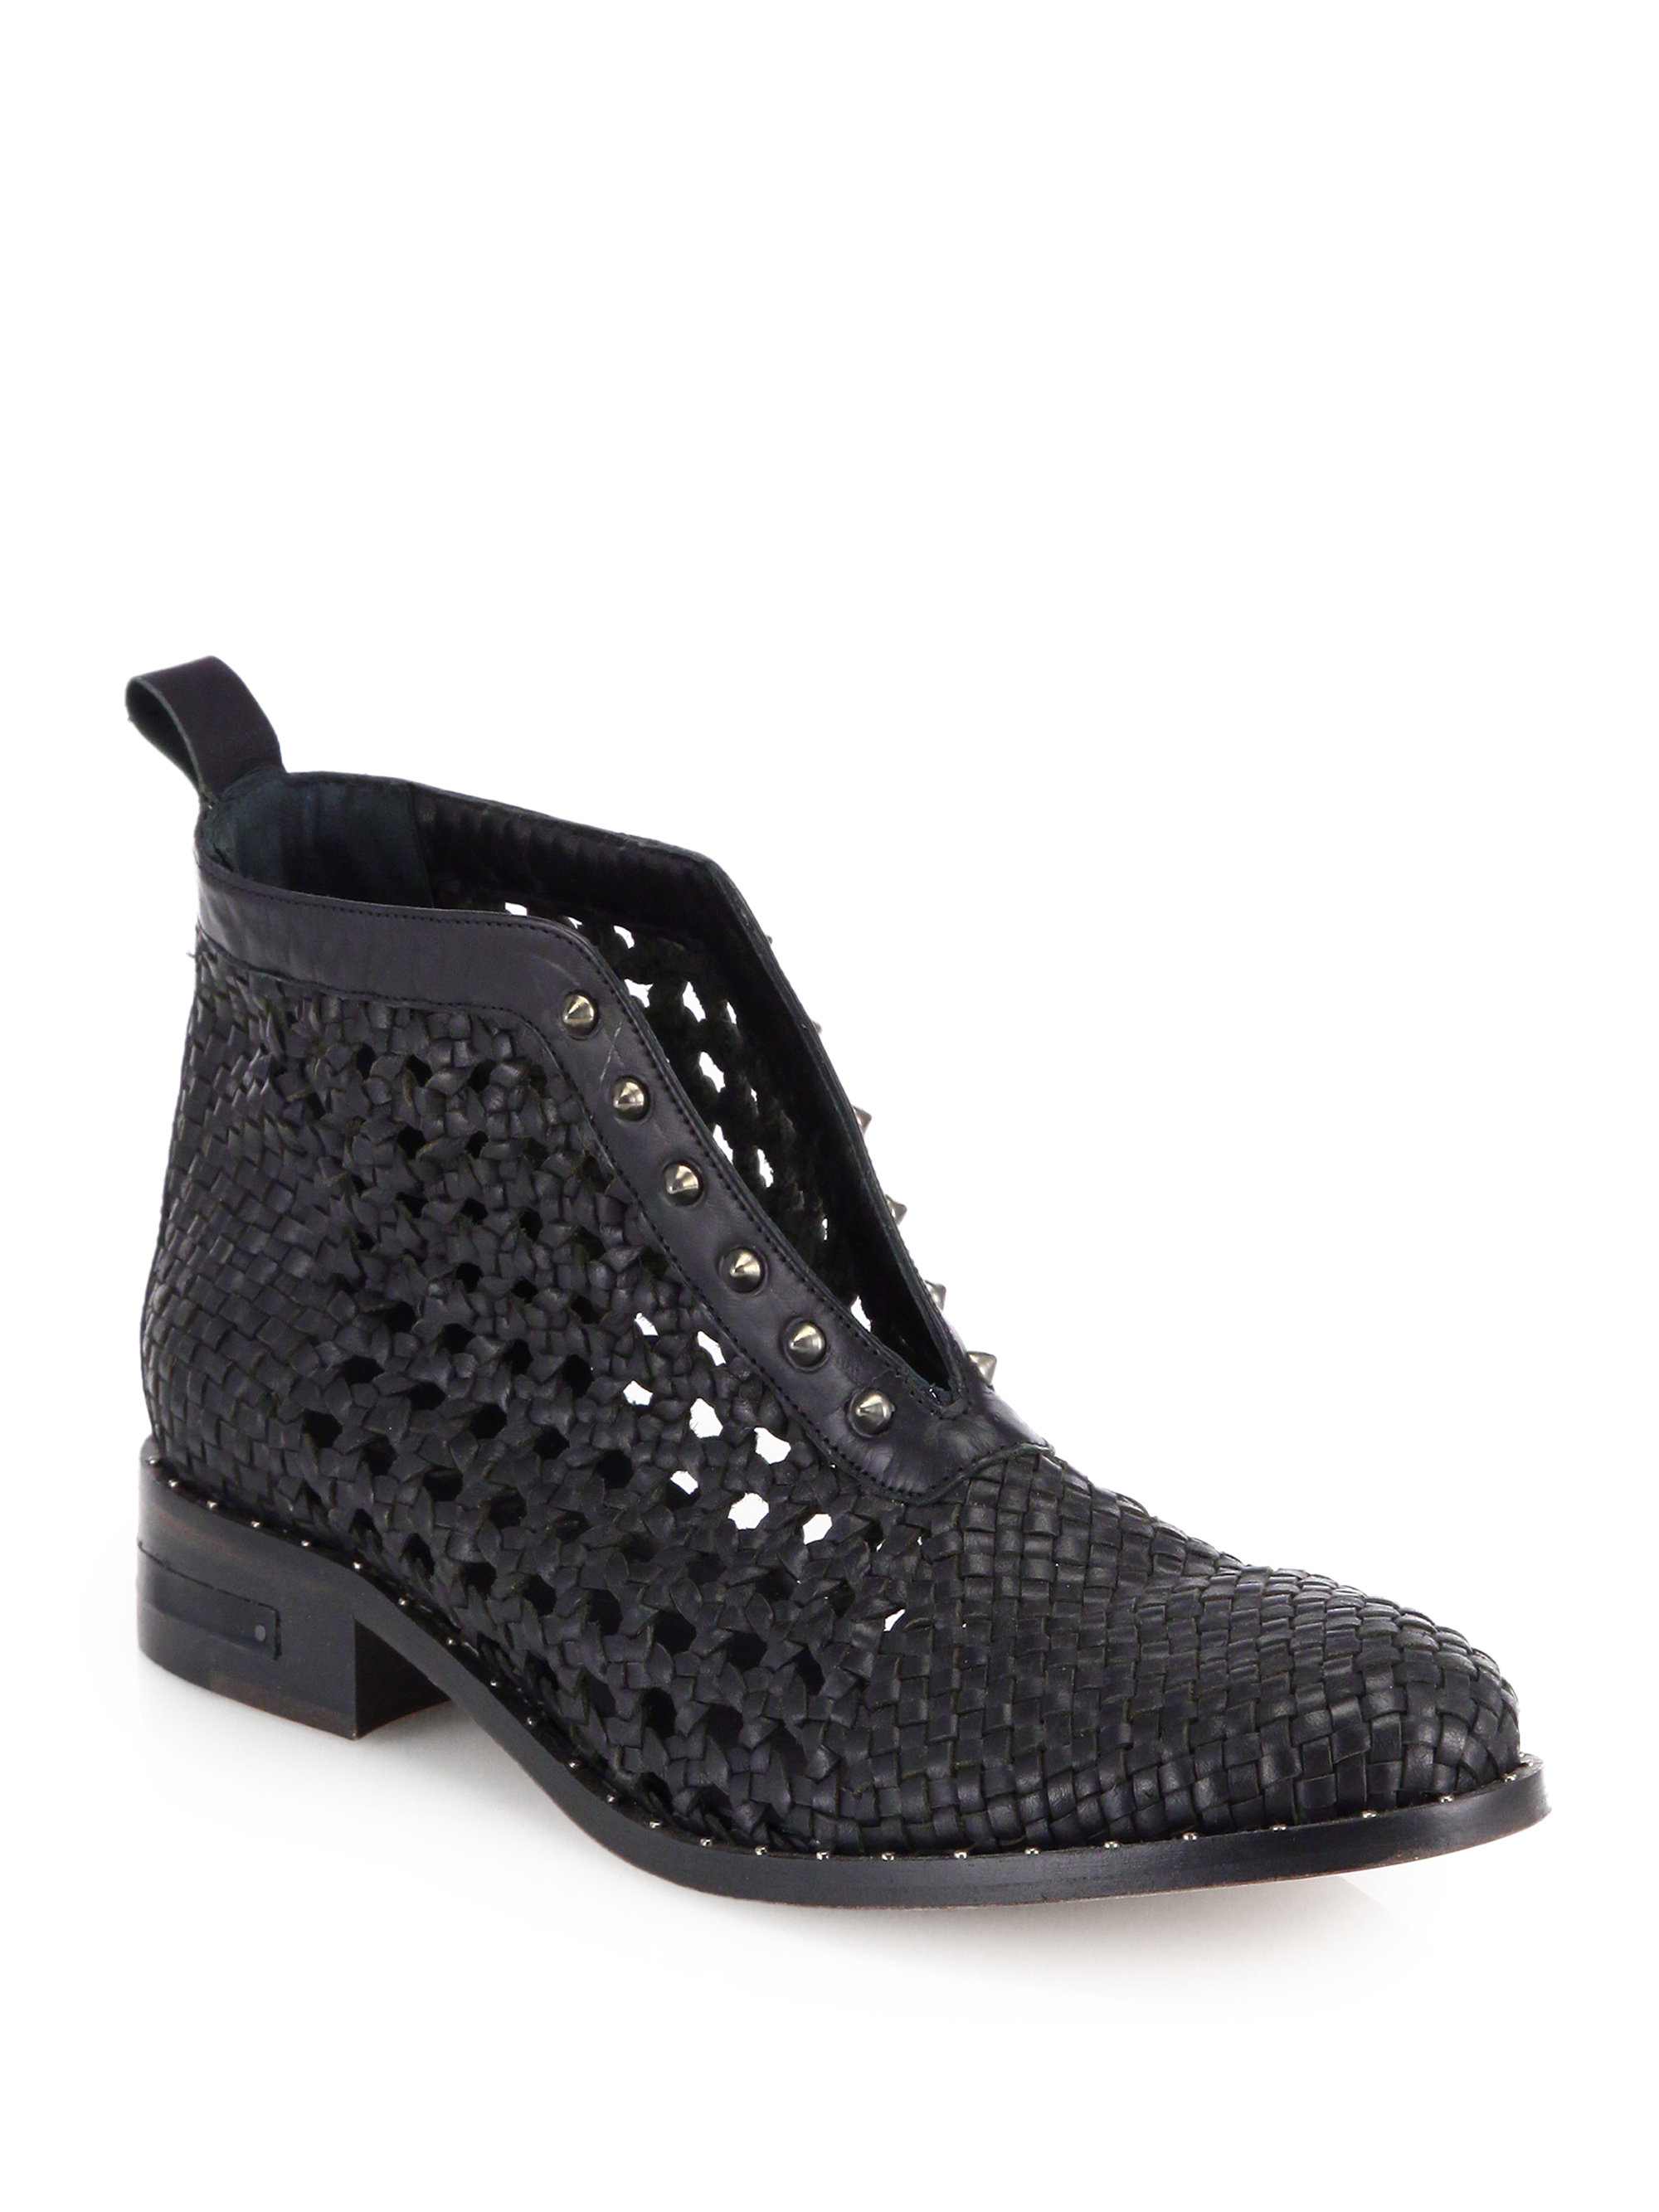 Frēda Salvador Draw Studded Woven Leather Ankle Boots in